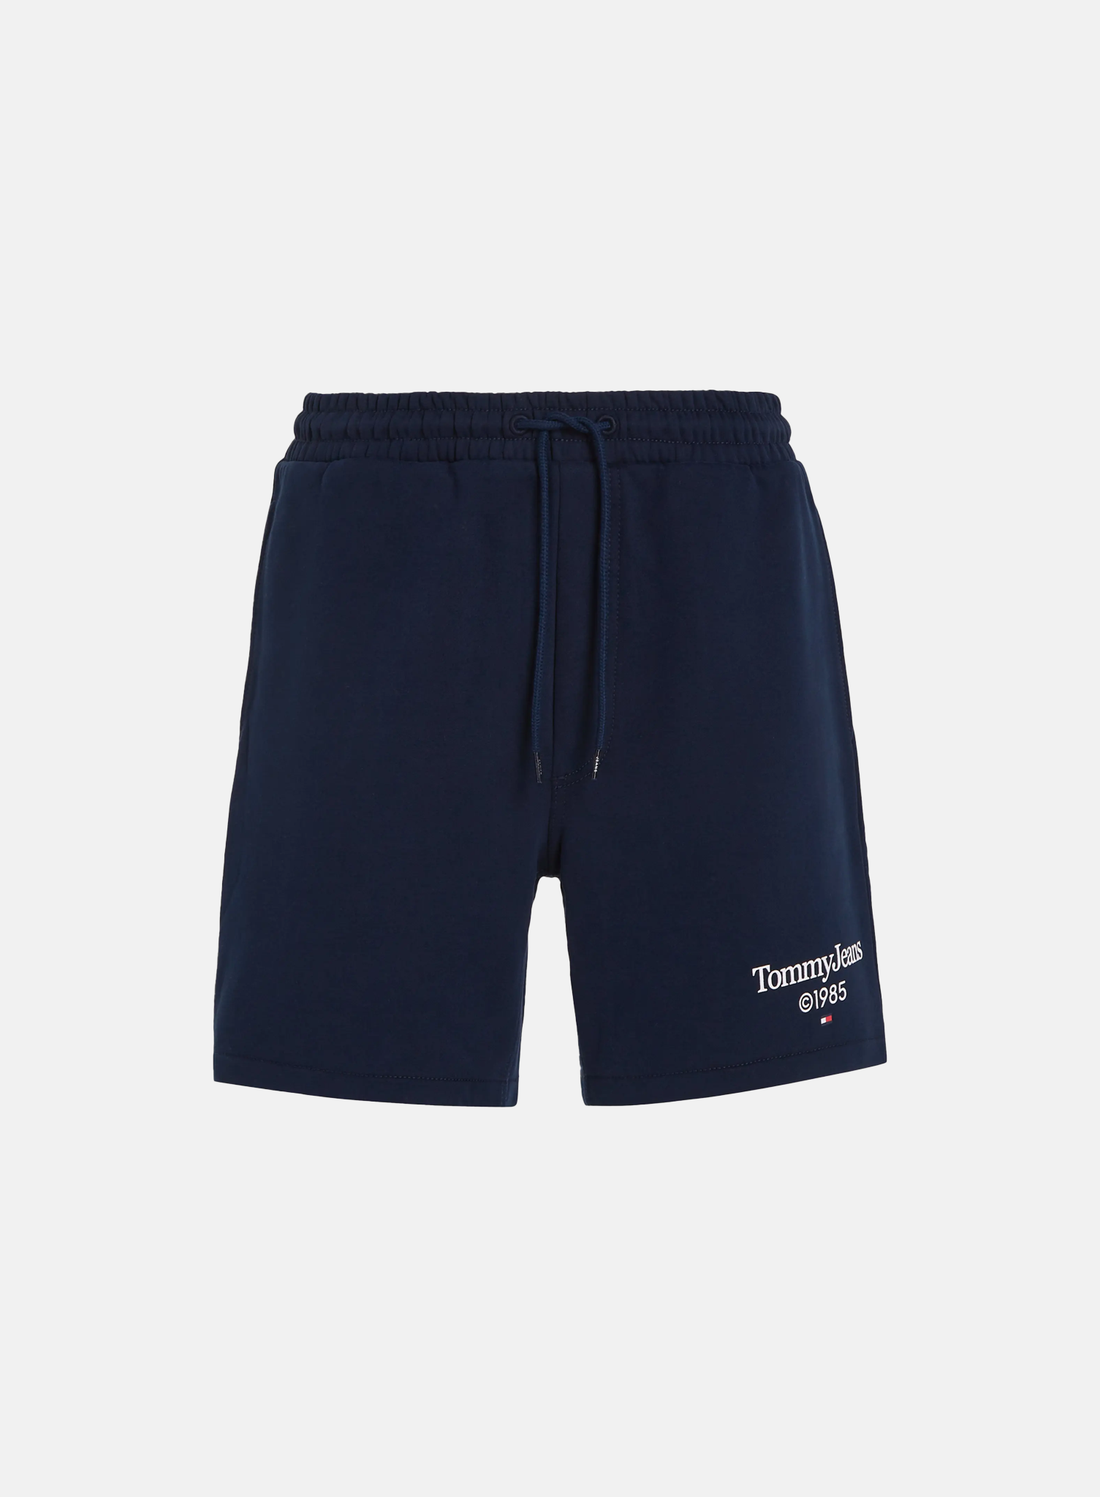 Tommy Jeans 1985 Graphic Short - Hympala Store 